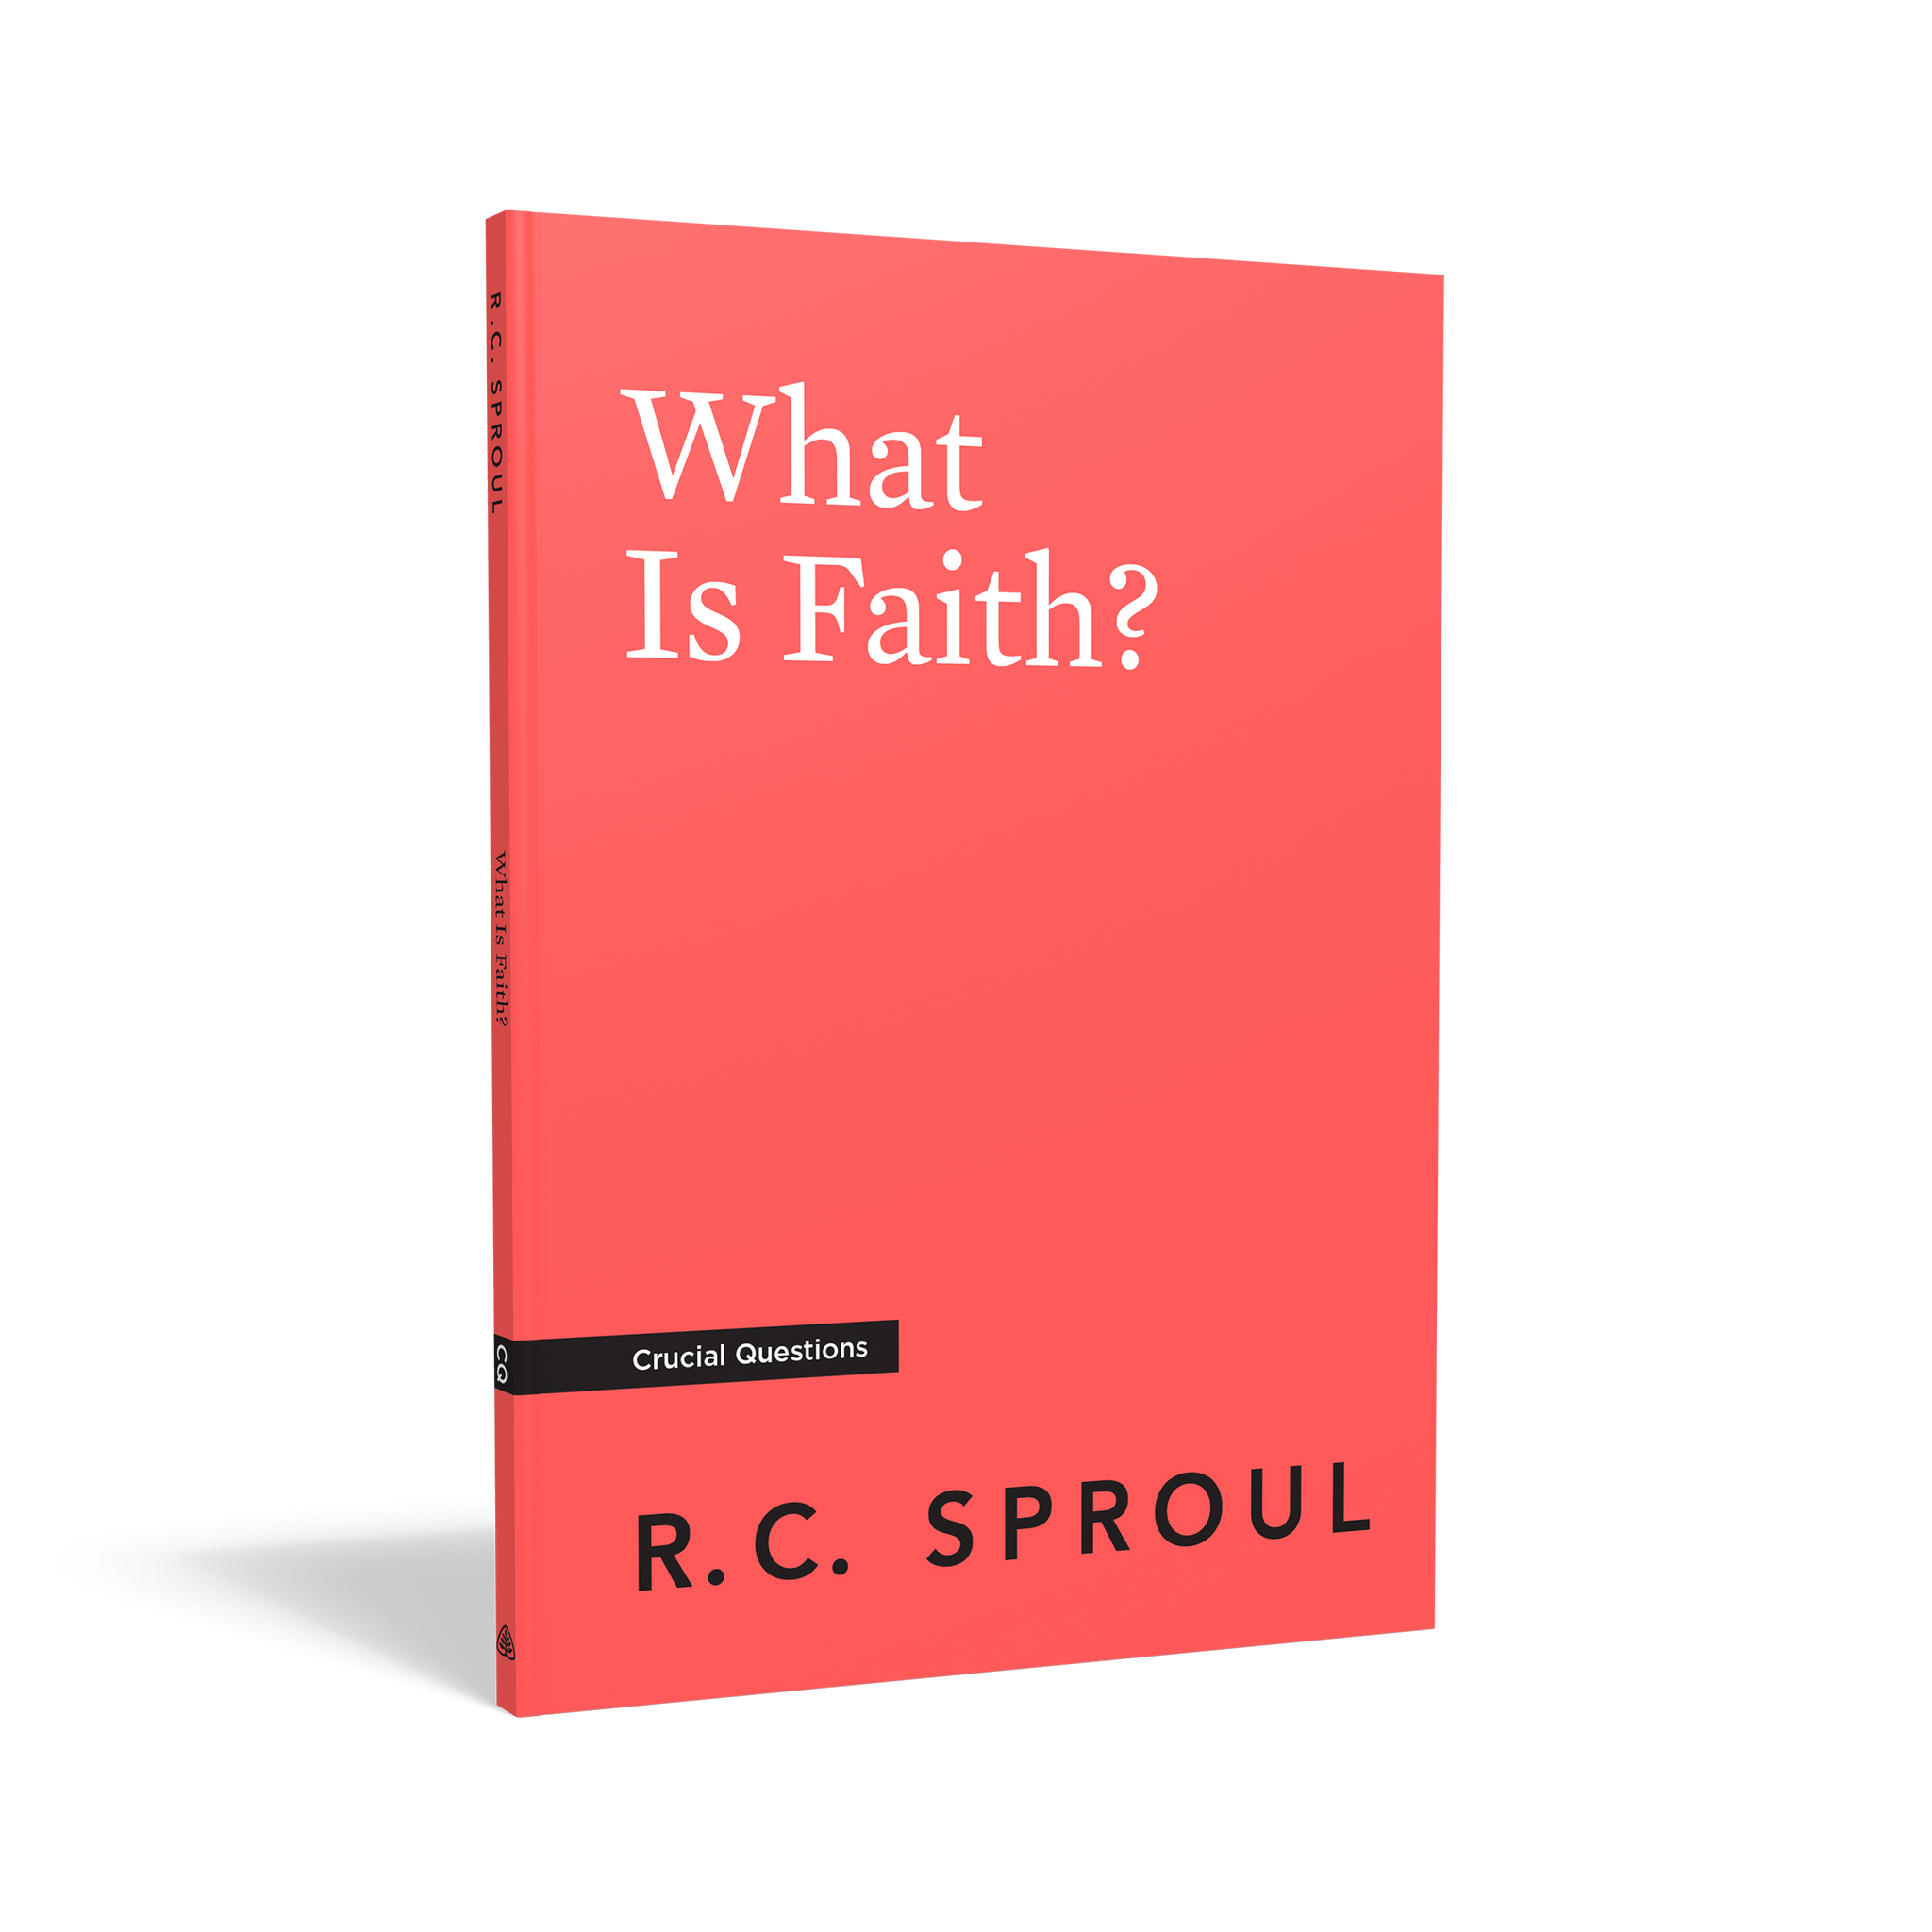 Crucial Questions - What is Faith?